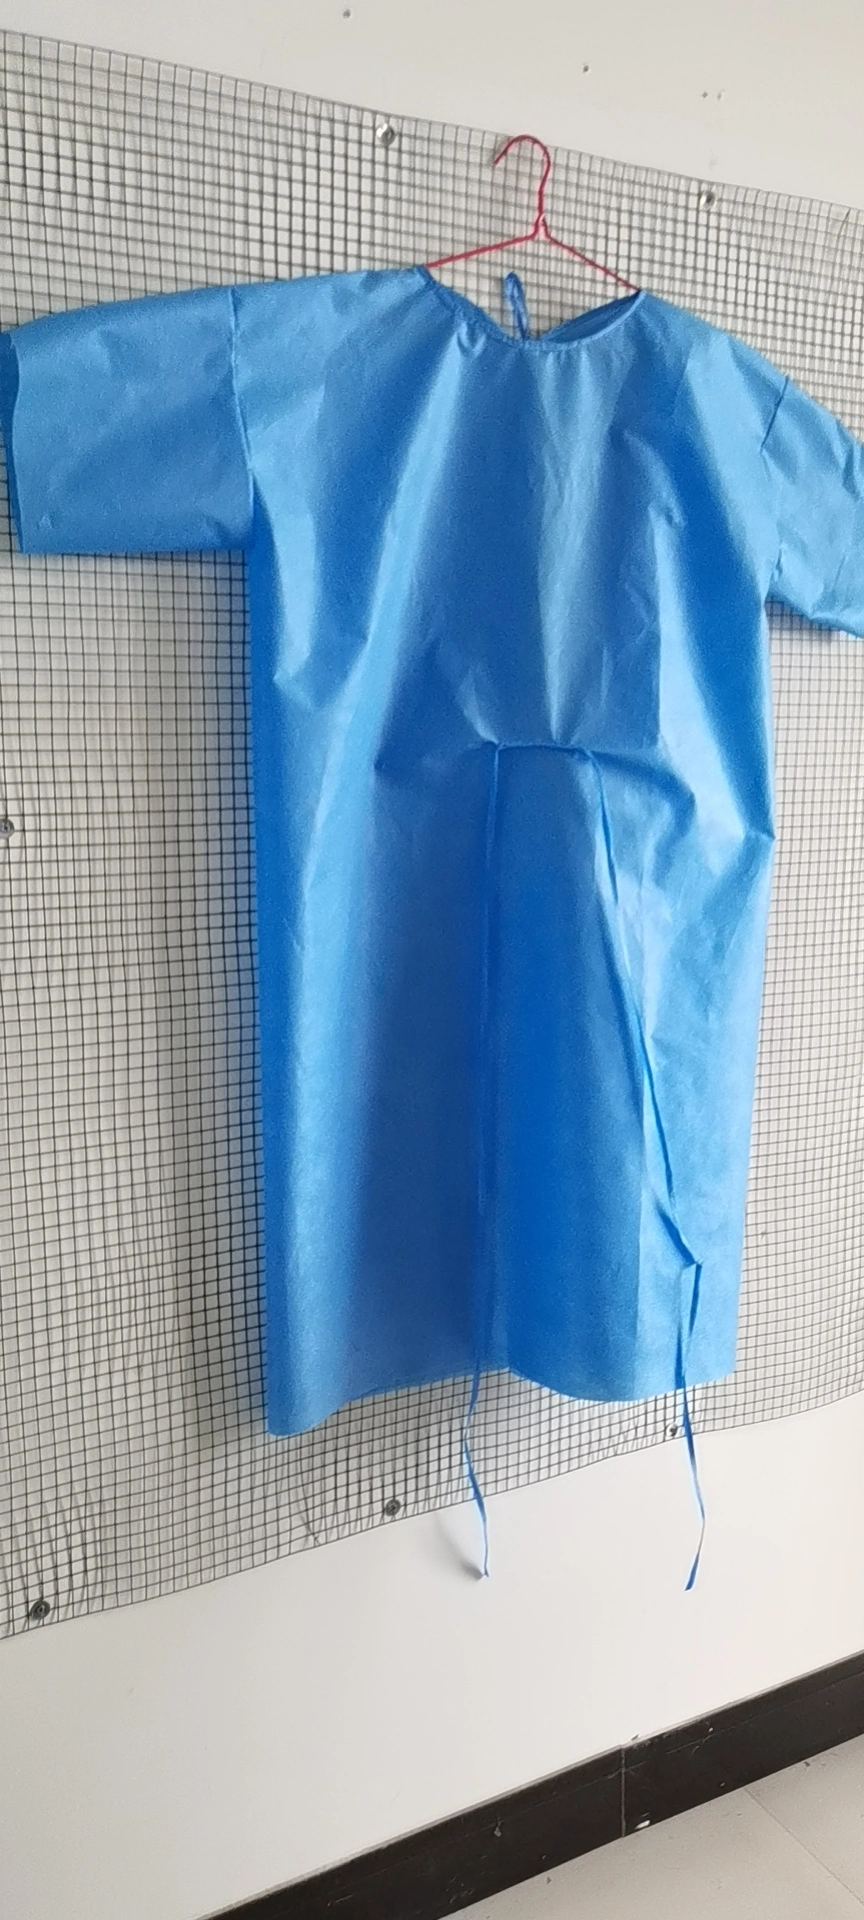 SMS Patient Gown with Short Sleeve Isolation Gown with Short Sleeve